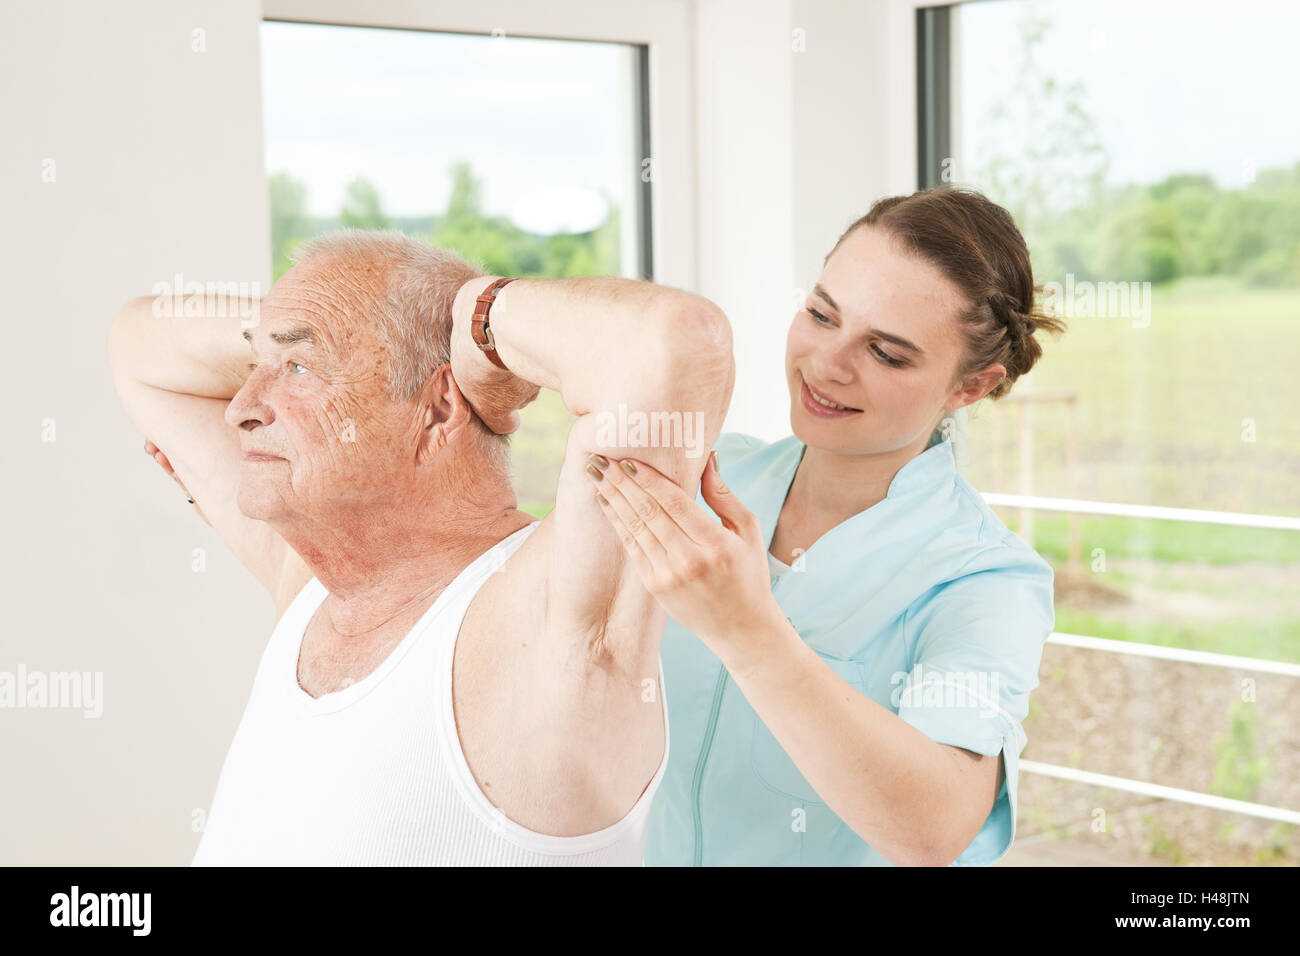 Boss with the physiotherapy, Stock Photo